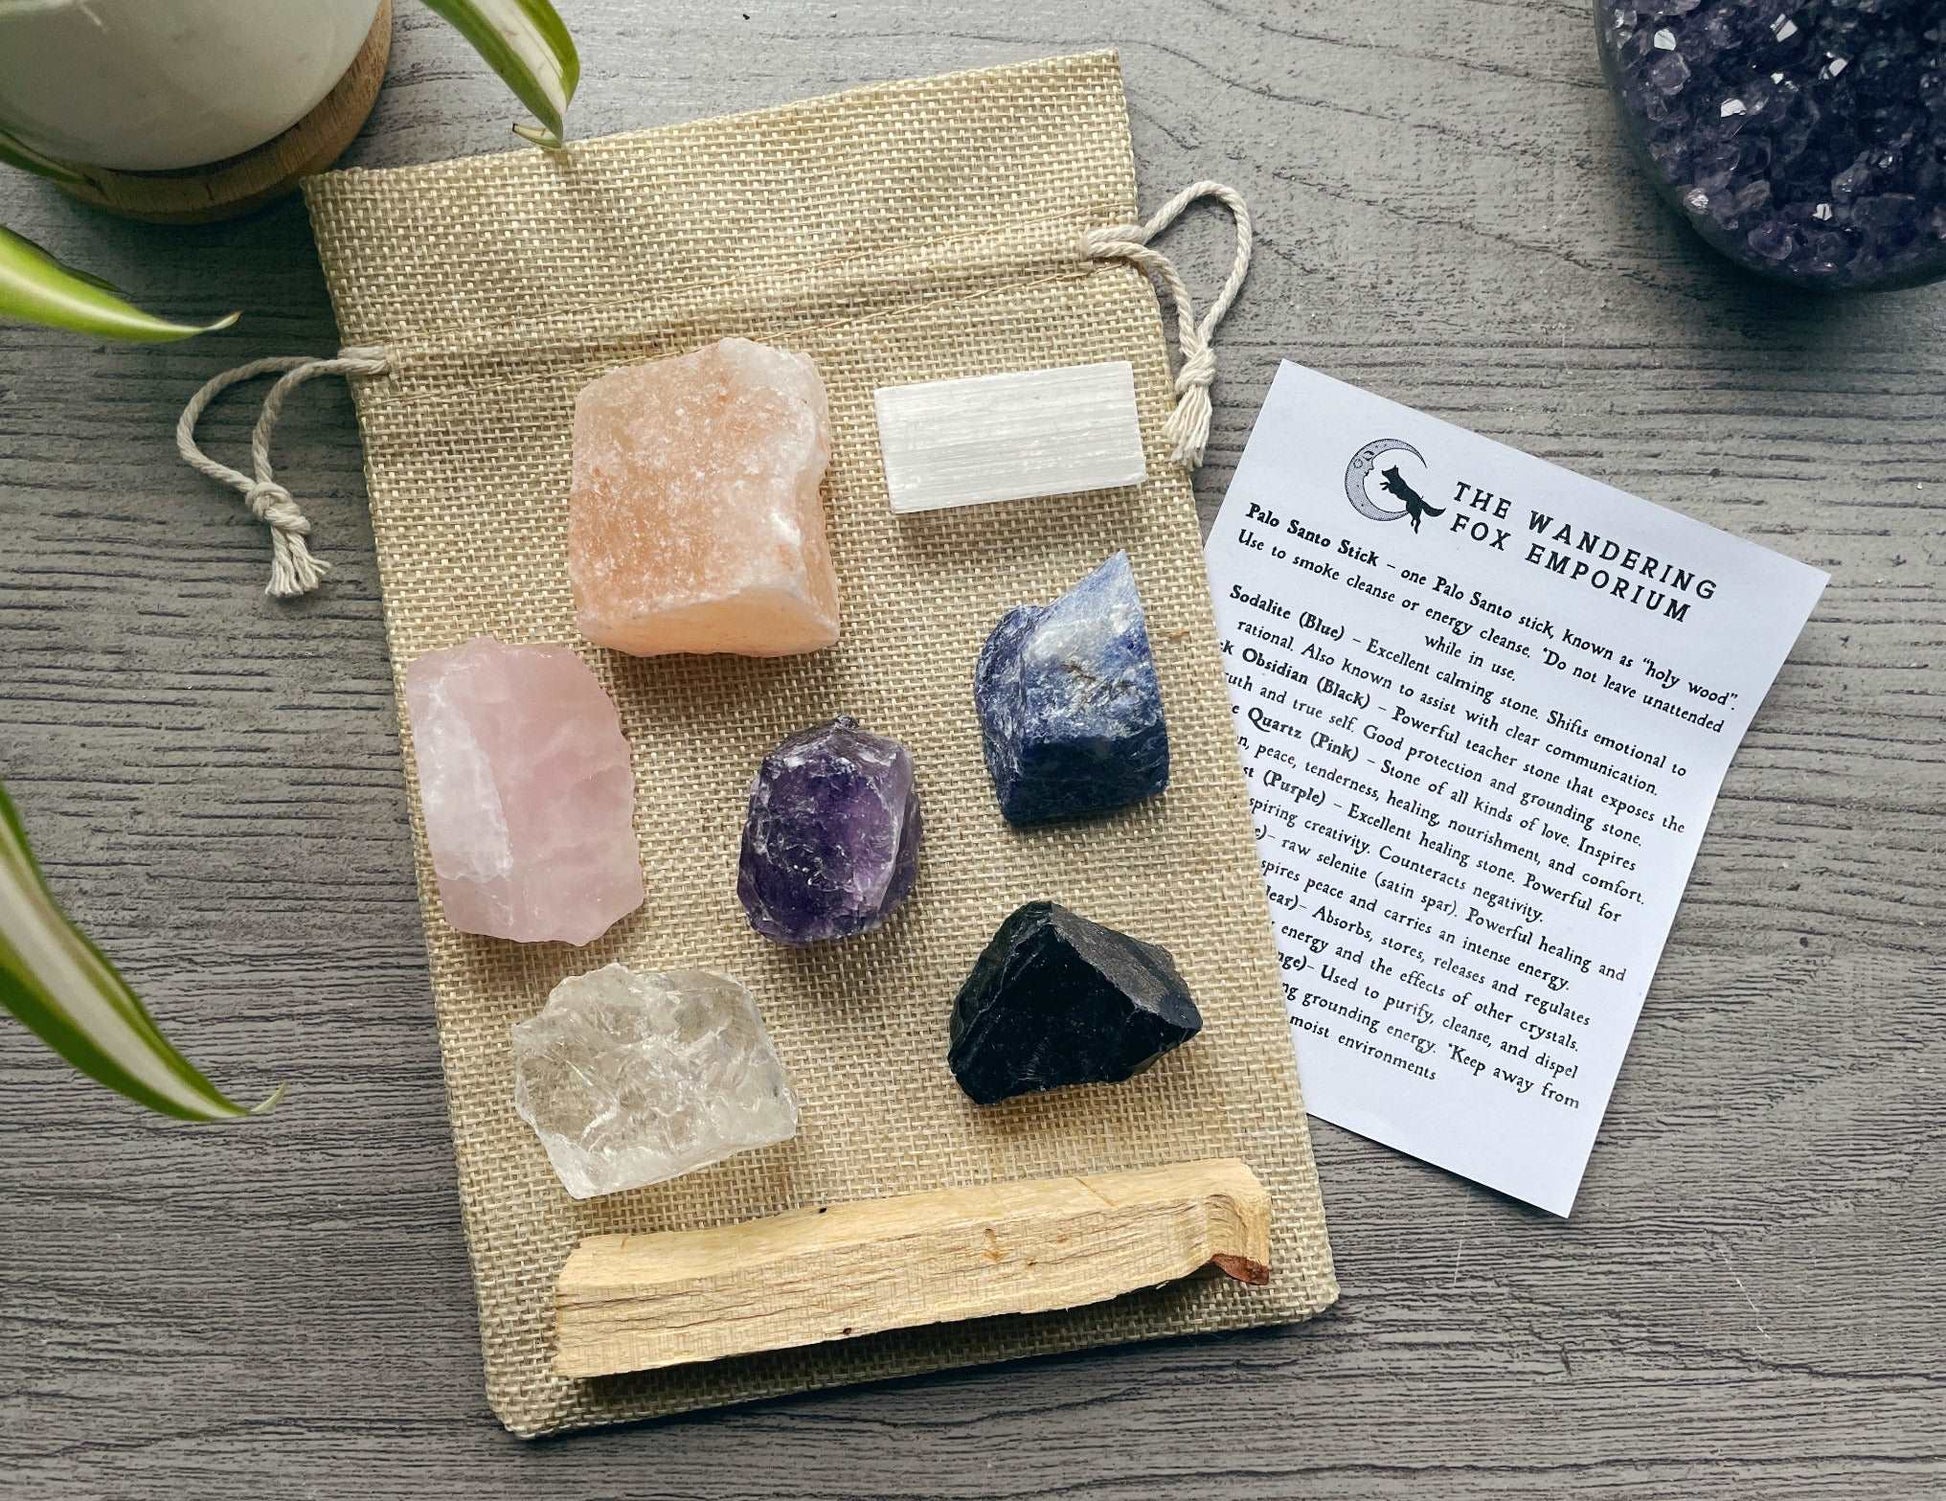 Pictured is a crystal starter set with various raw crystals and a palo santo stick. A piece of paper is nearby with the information about the crystals on it.